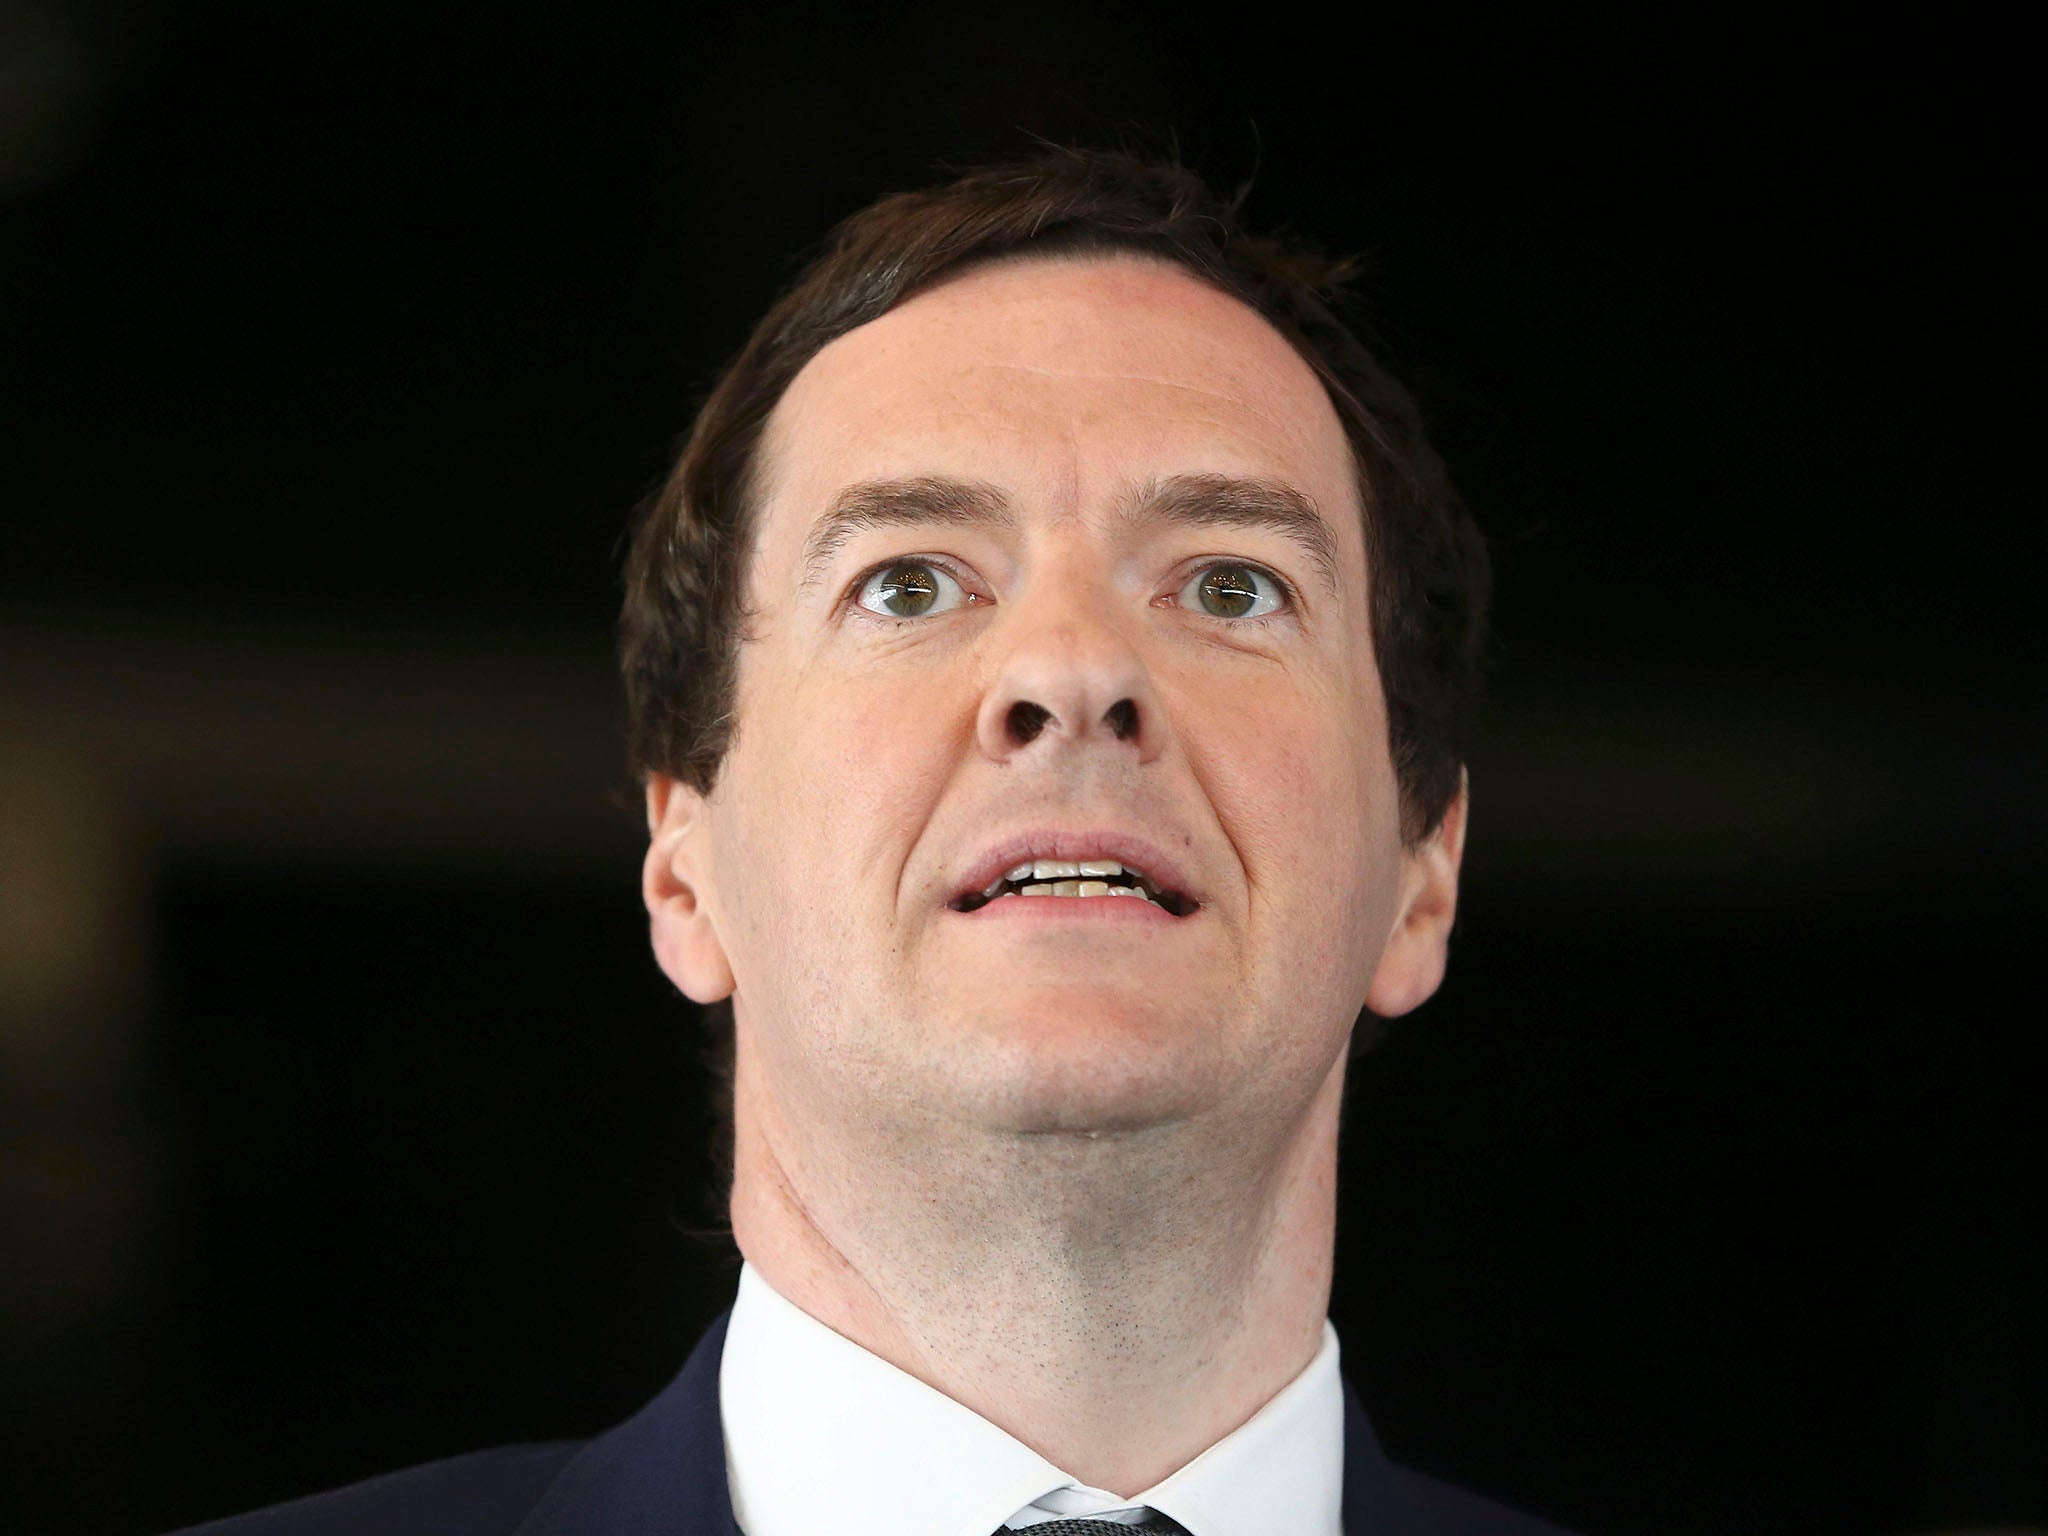 George Osborne was widely accused of scaremongering during the campaign